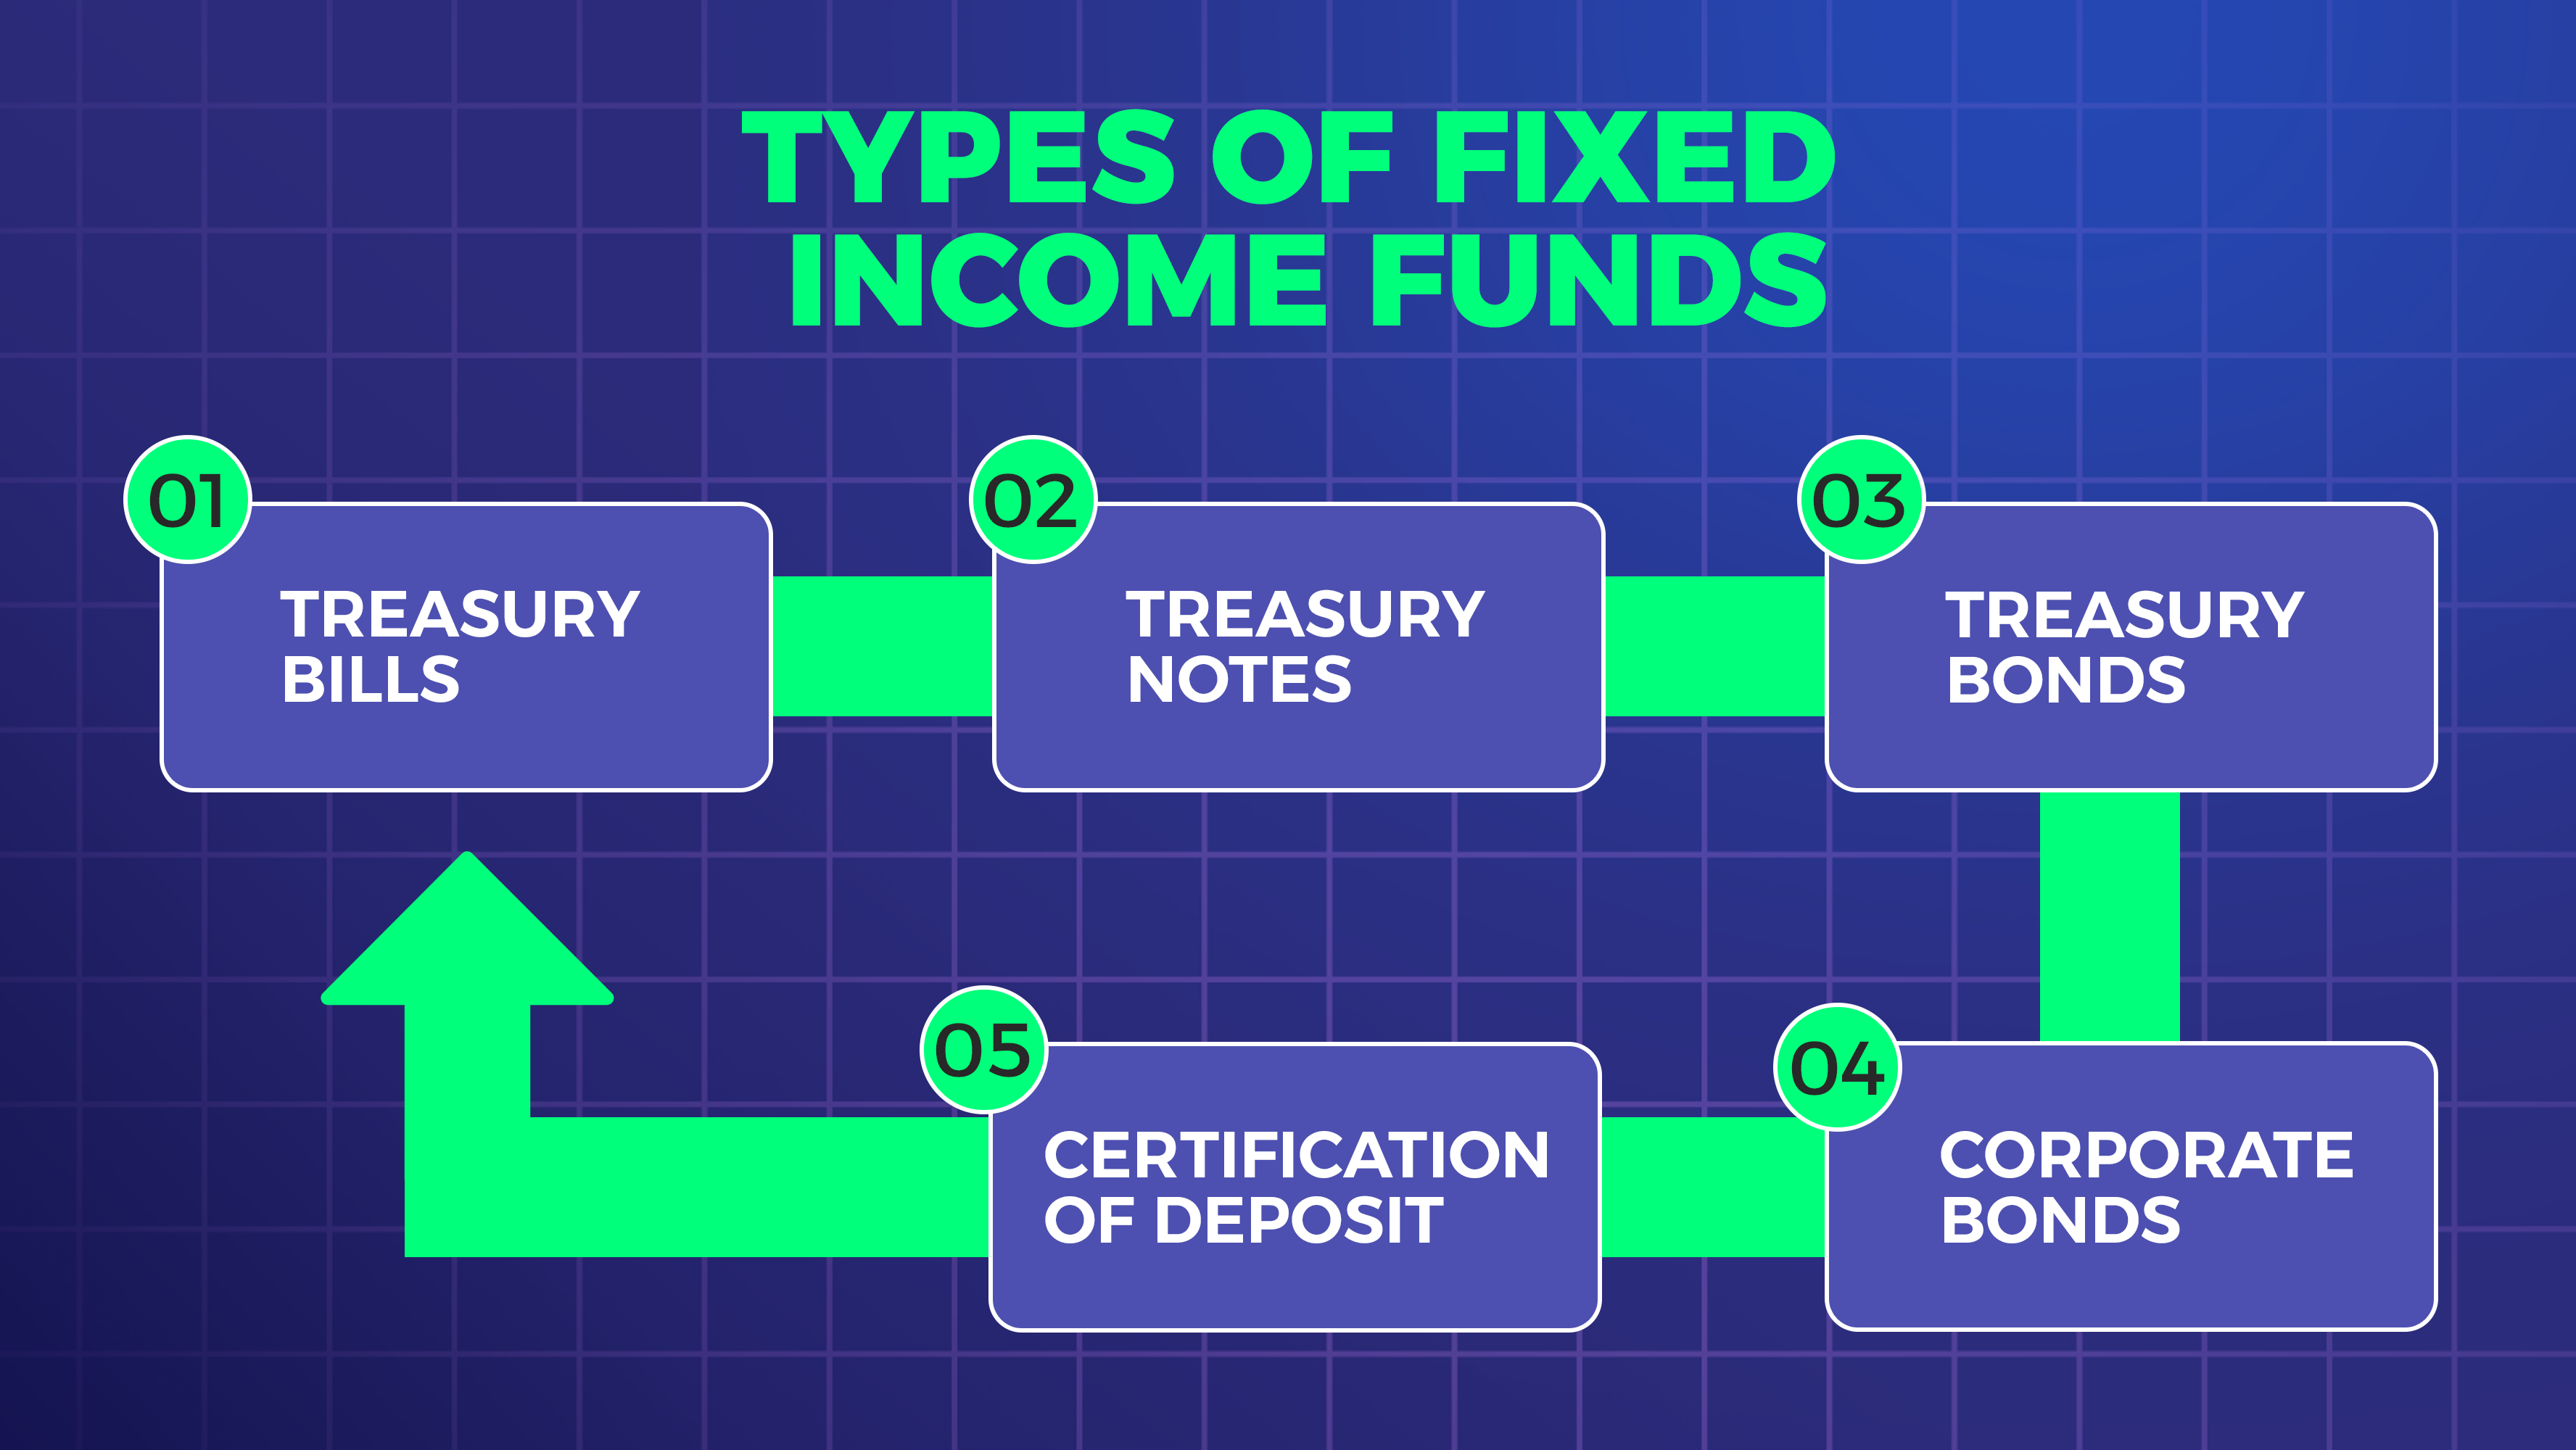 Types of fixed income